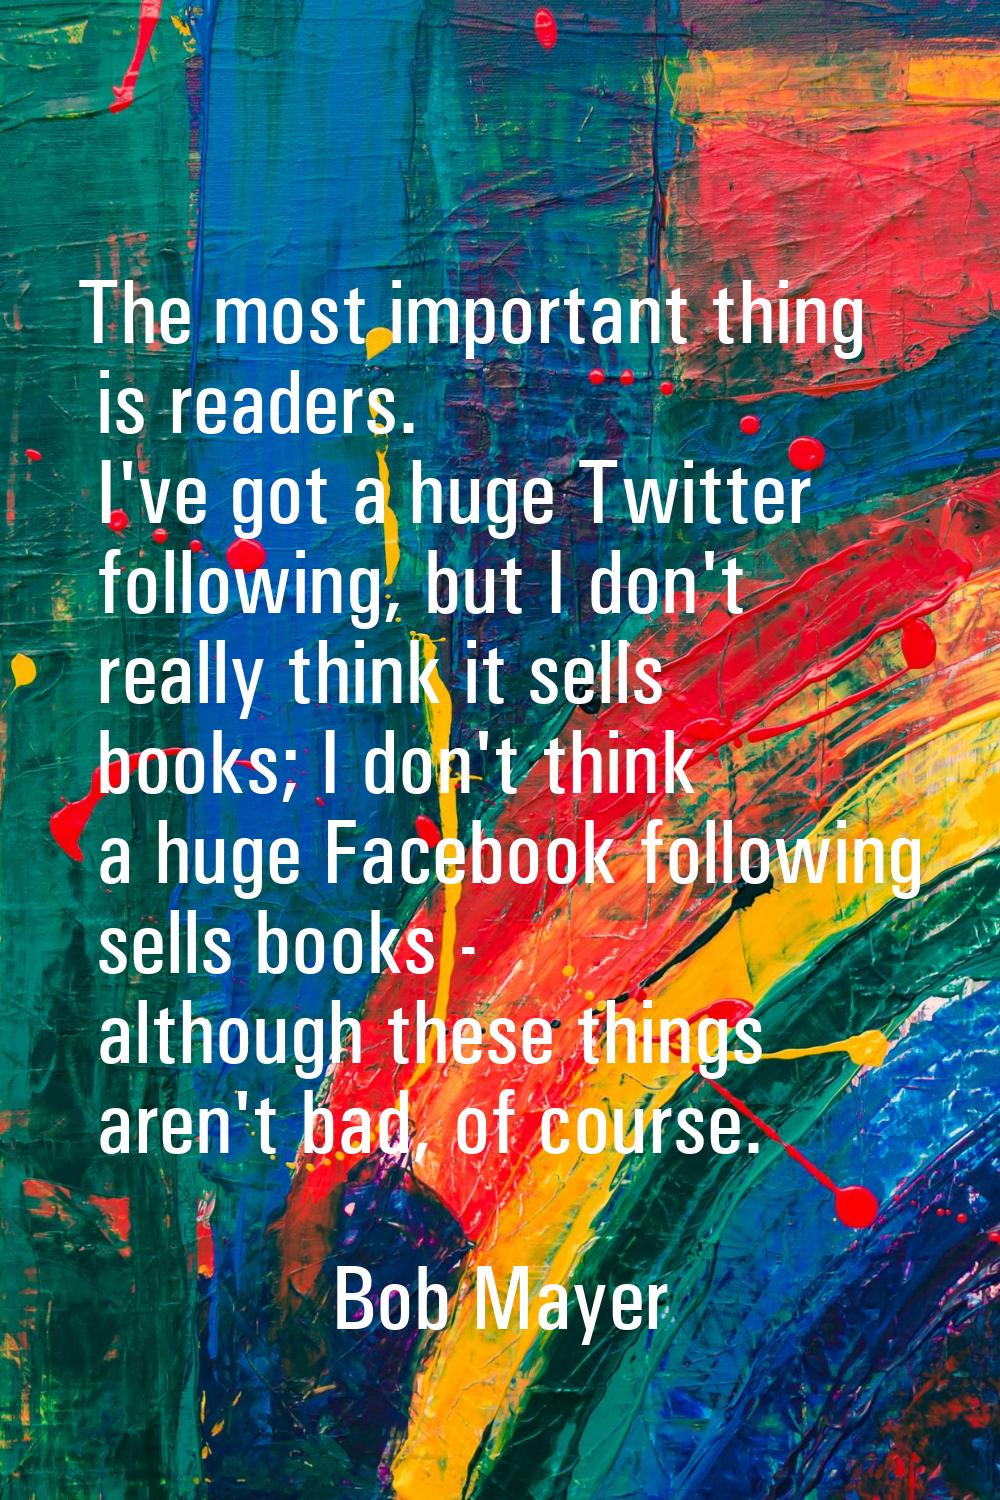 The most important thing is readers. I've got a huge Twitter following, but I don't really think it